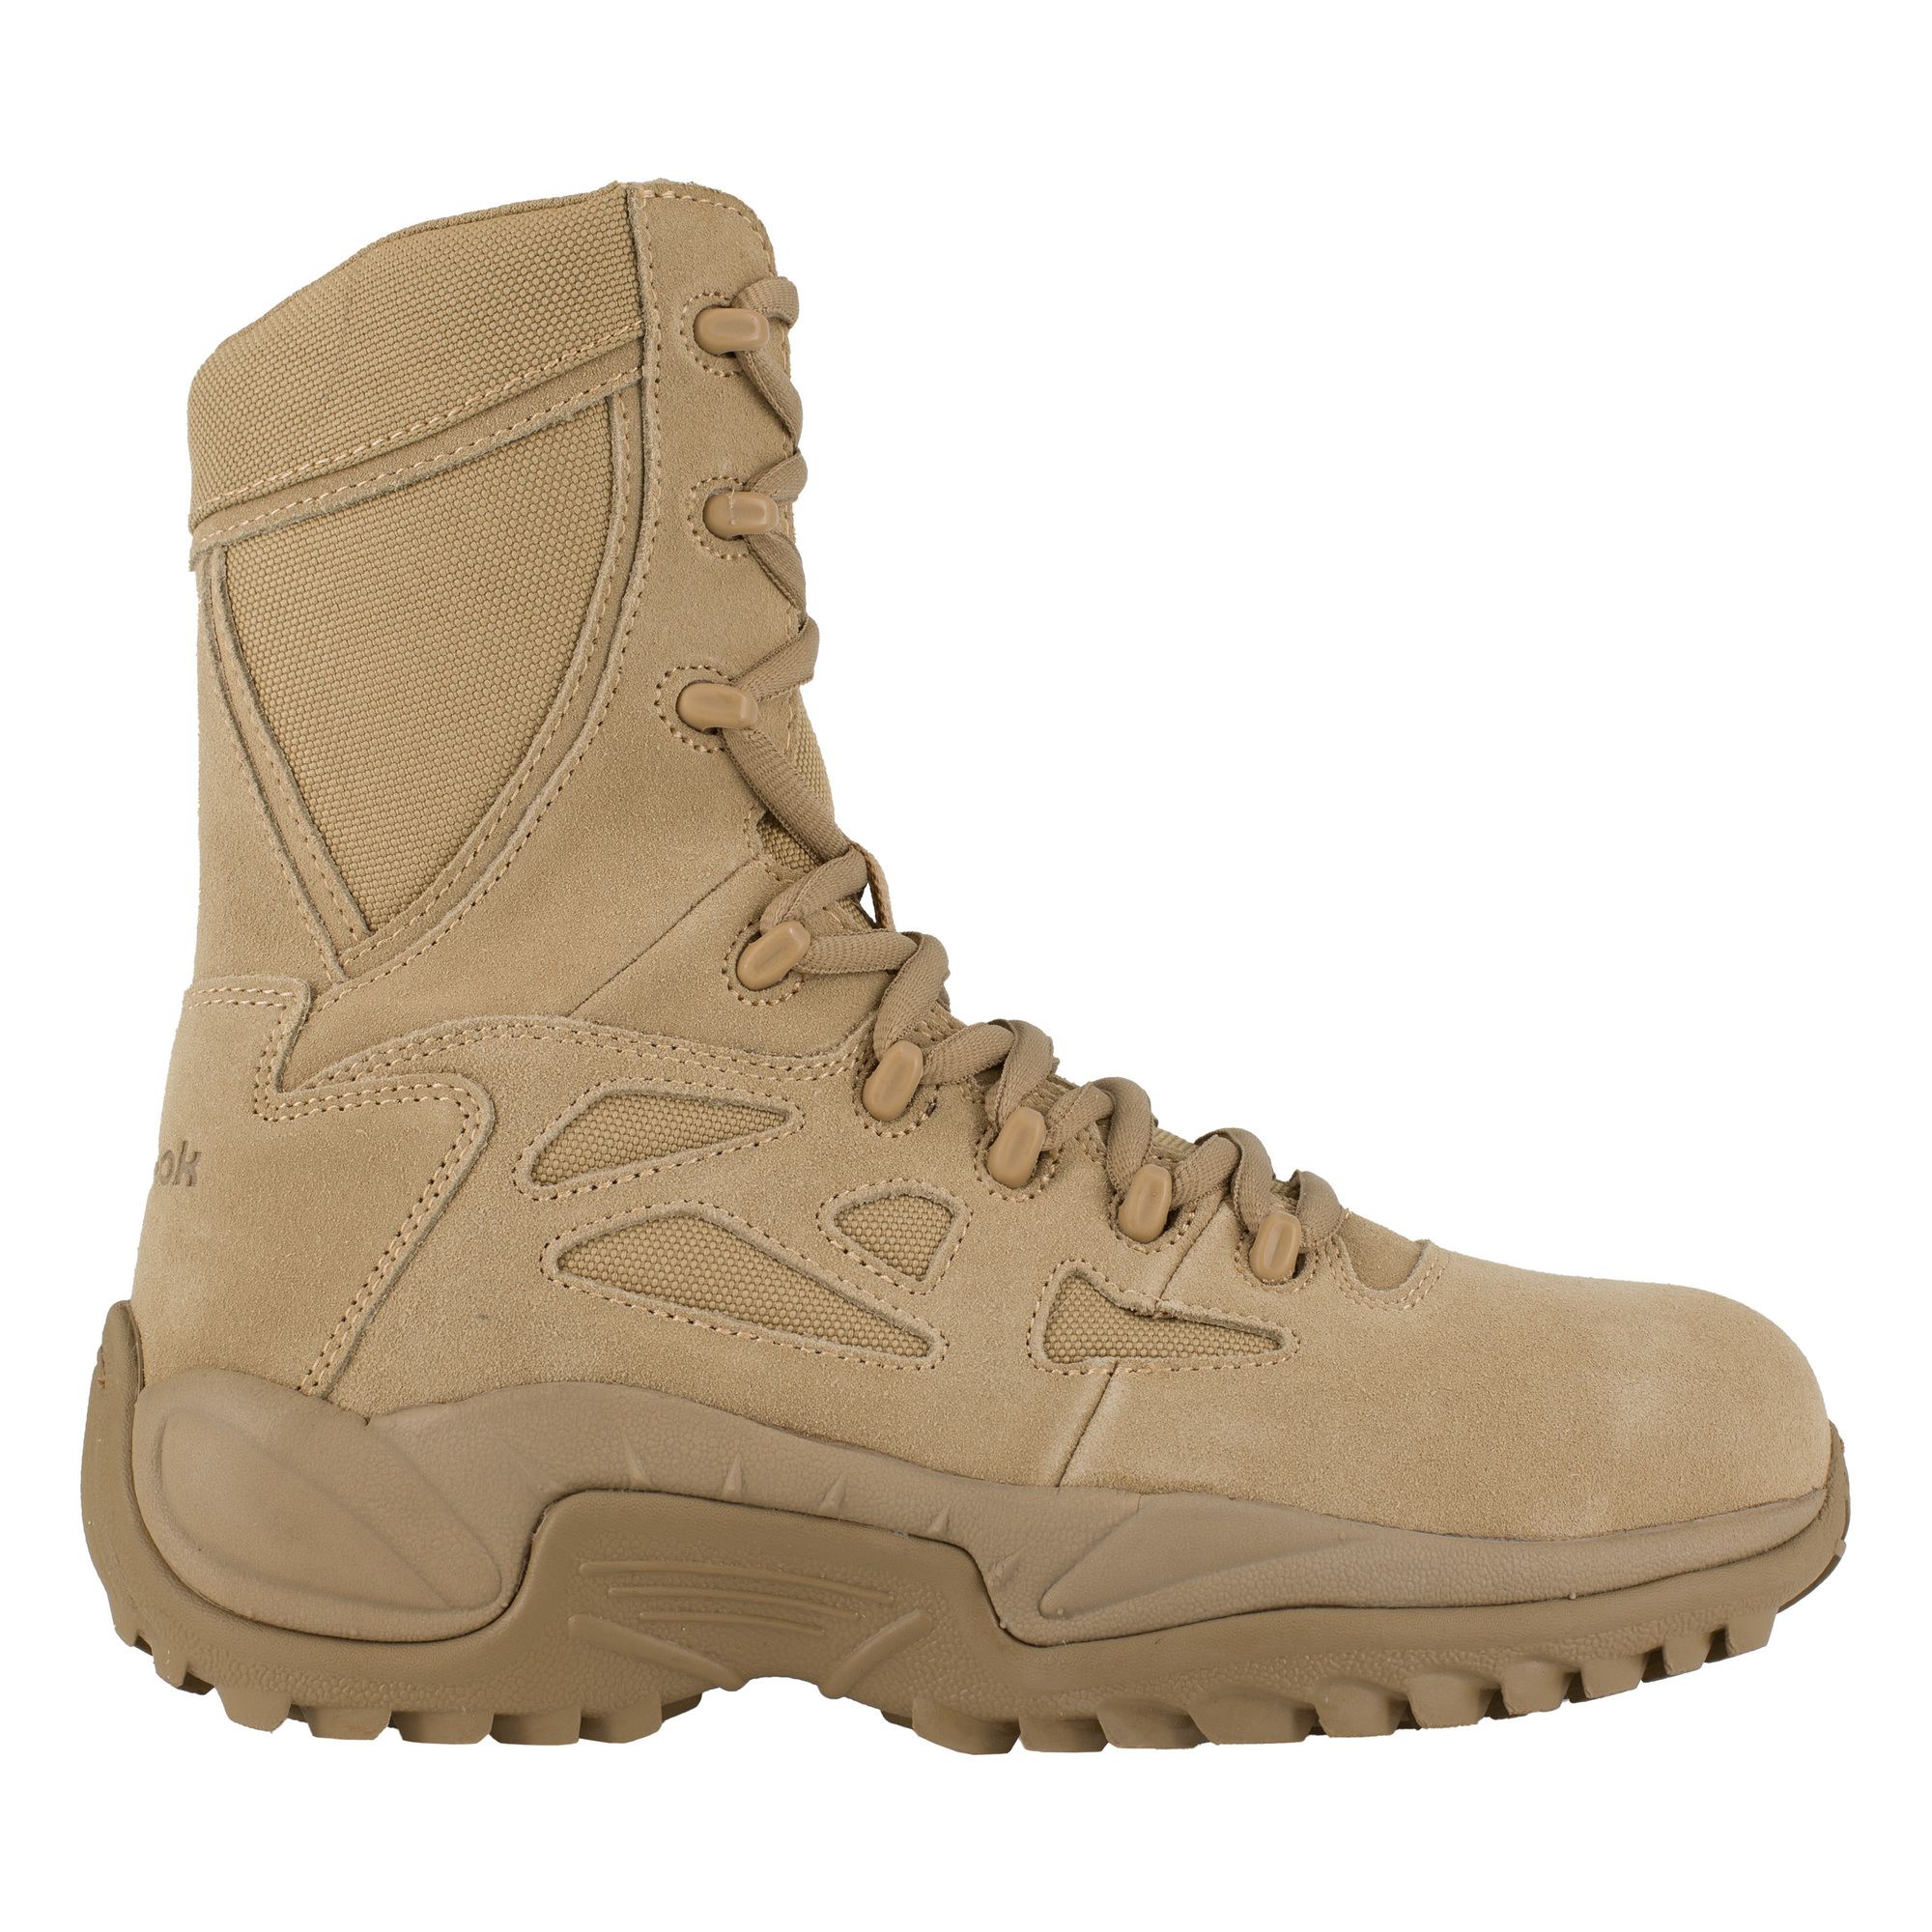 Reebok, 8Inch Stealth Tactical Boot with Side Zipper, Size 6, Width Wide, Color Desert Tan, Model RB894 -  RB894-W-06.0